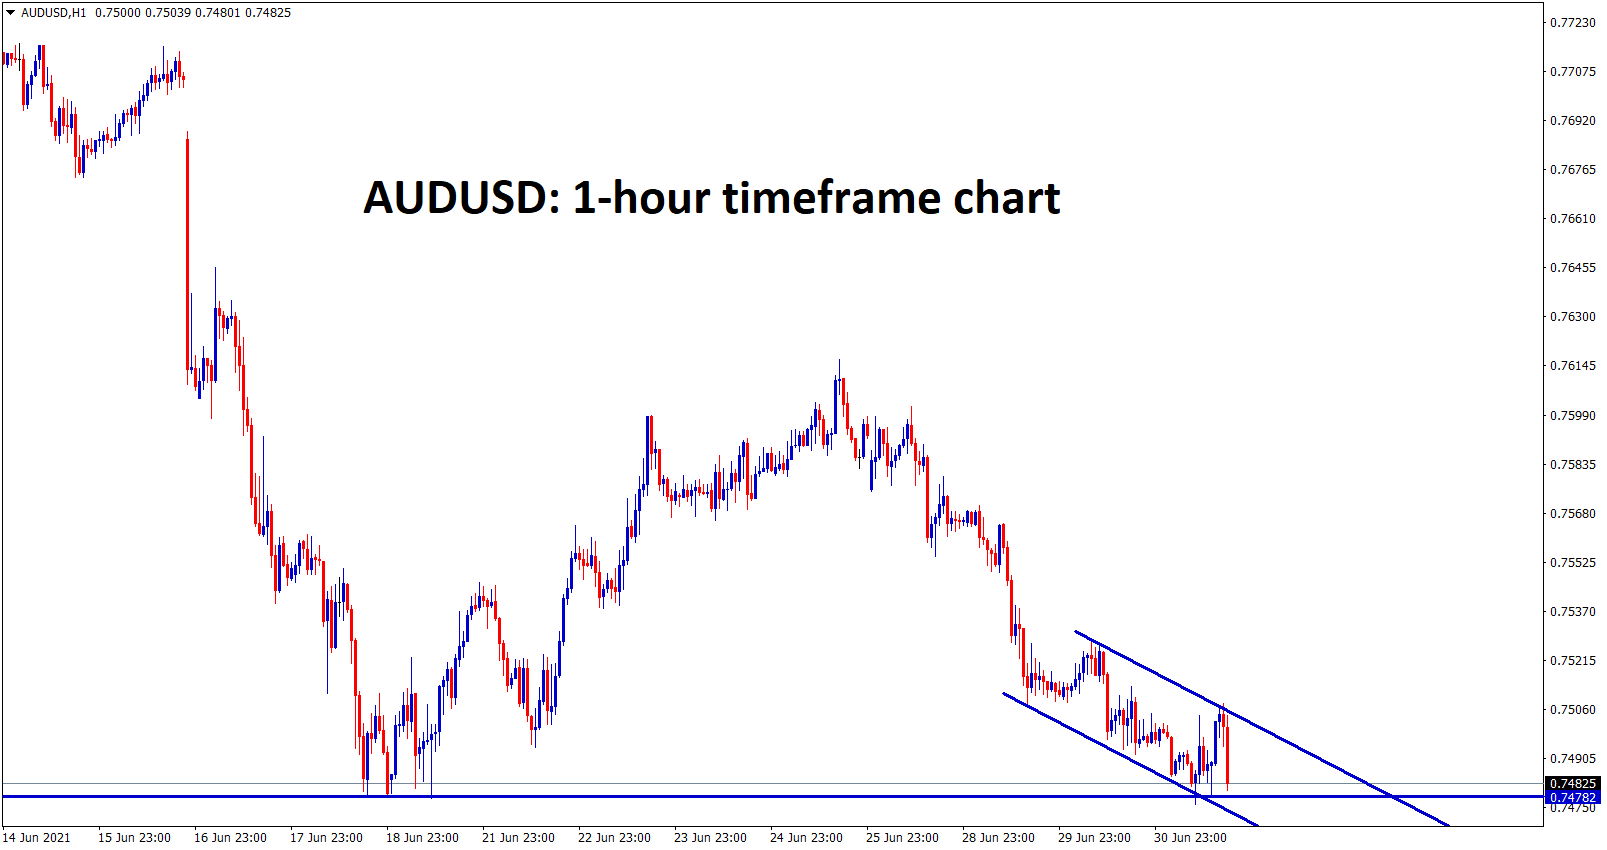 AUDUSD is standing at the support zone and moving in a descending channel